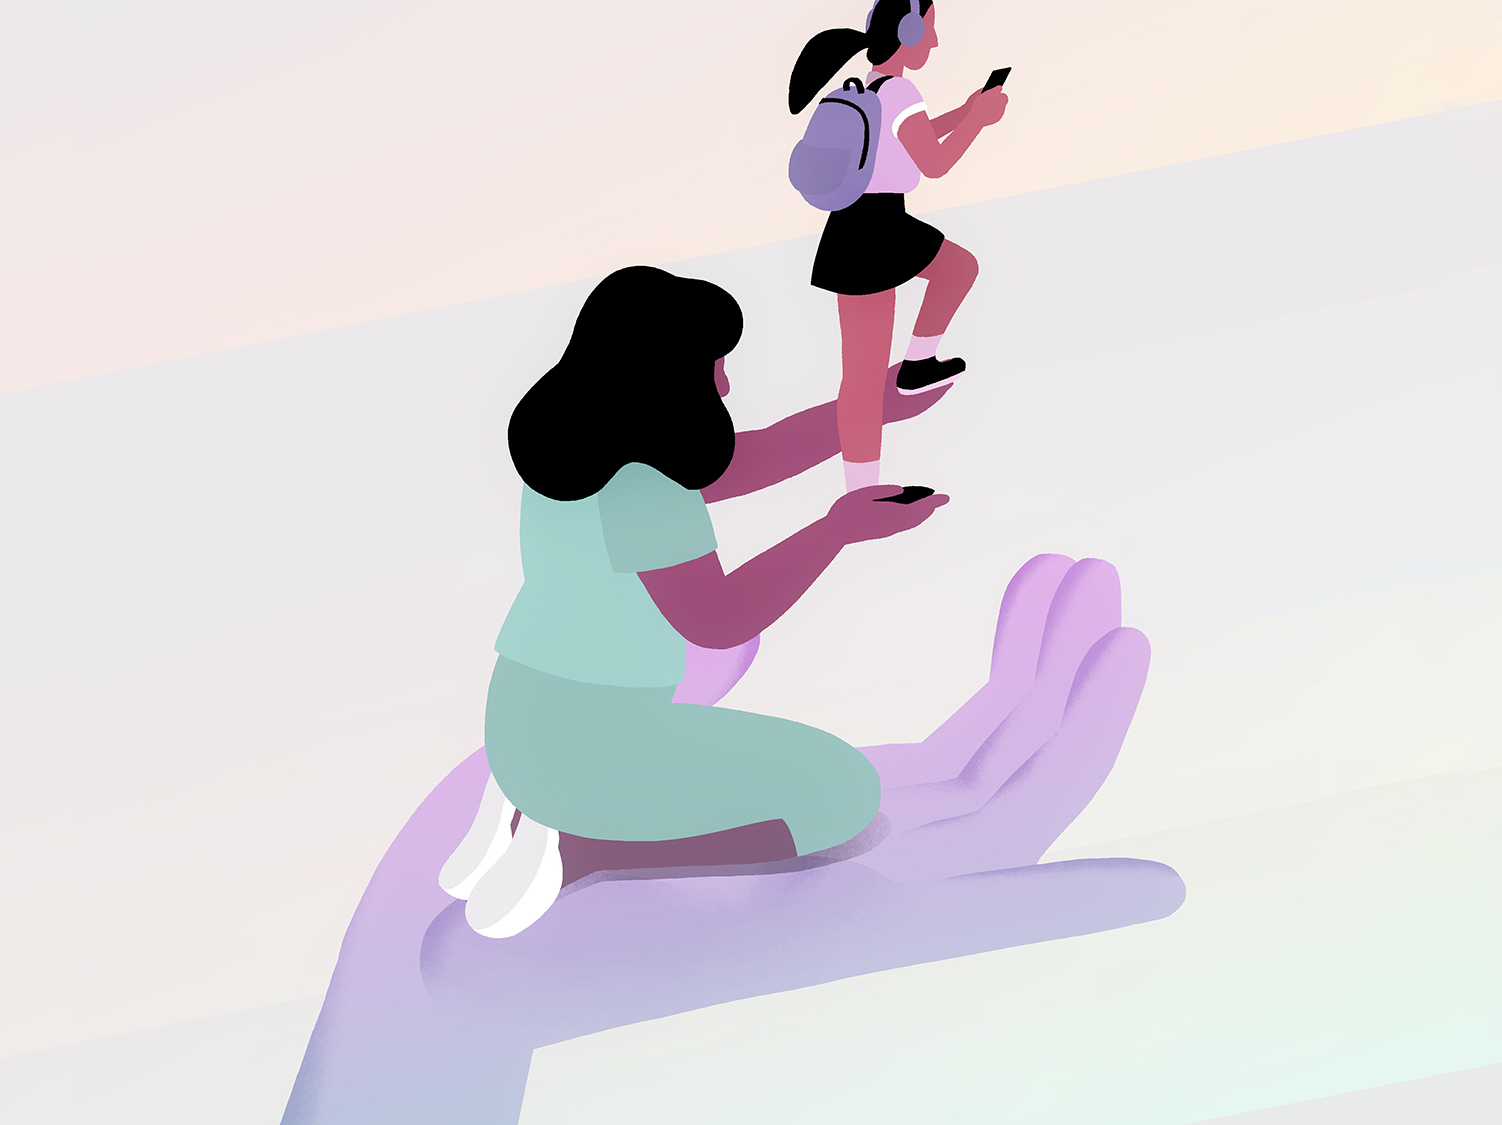 Social support networks can help mothers of teenagers navigate through difficulties and maintain closeness with their children. (Source: NPR)